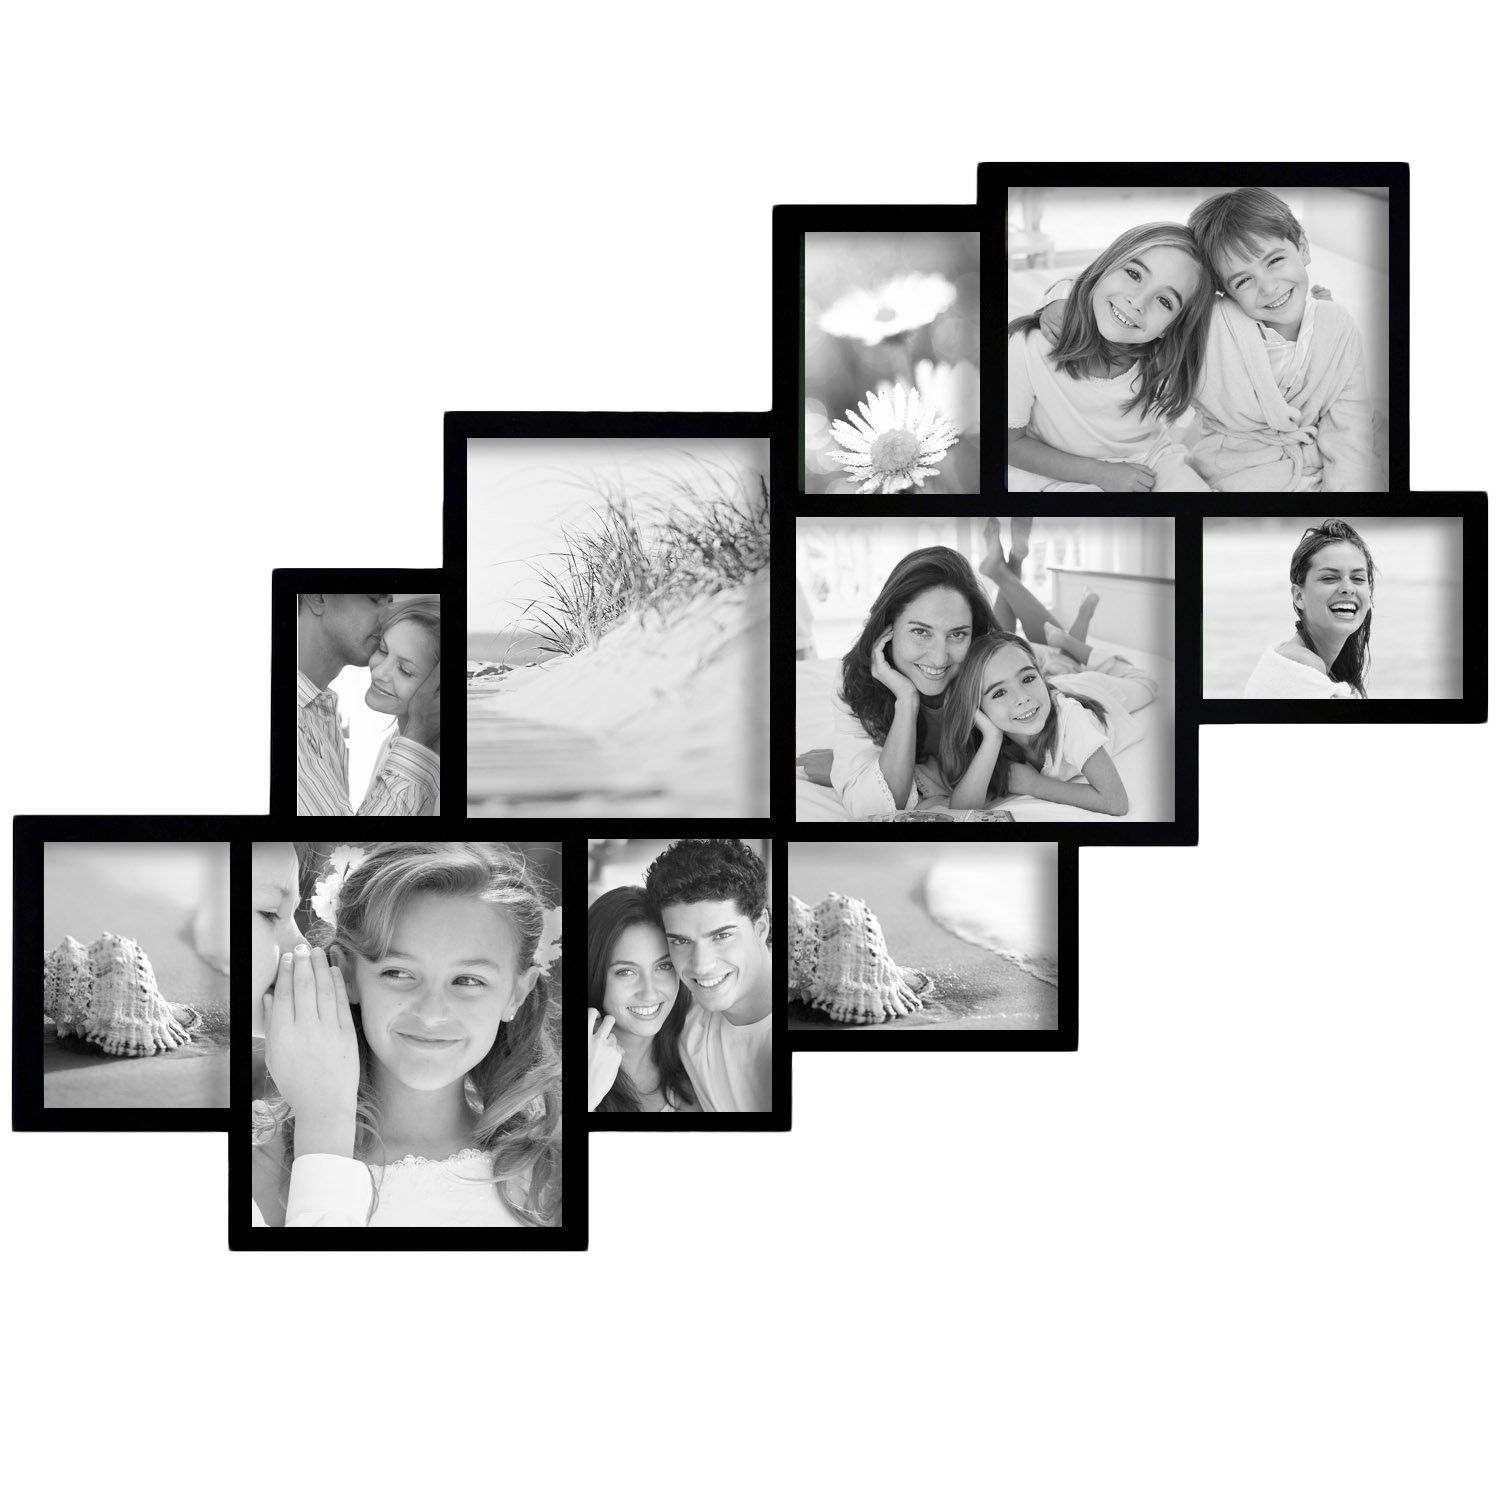 Black wood wall hanging photo frame collage with 10 clustered